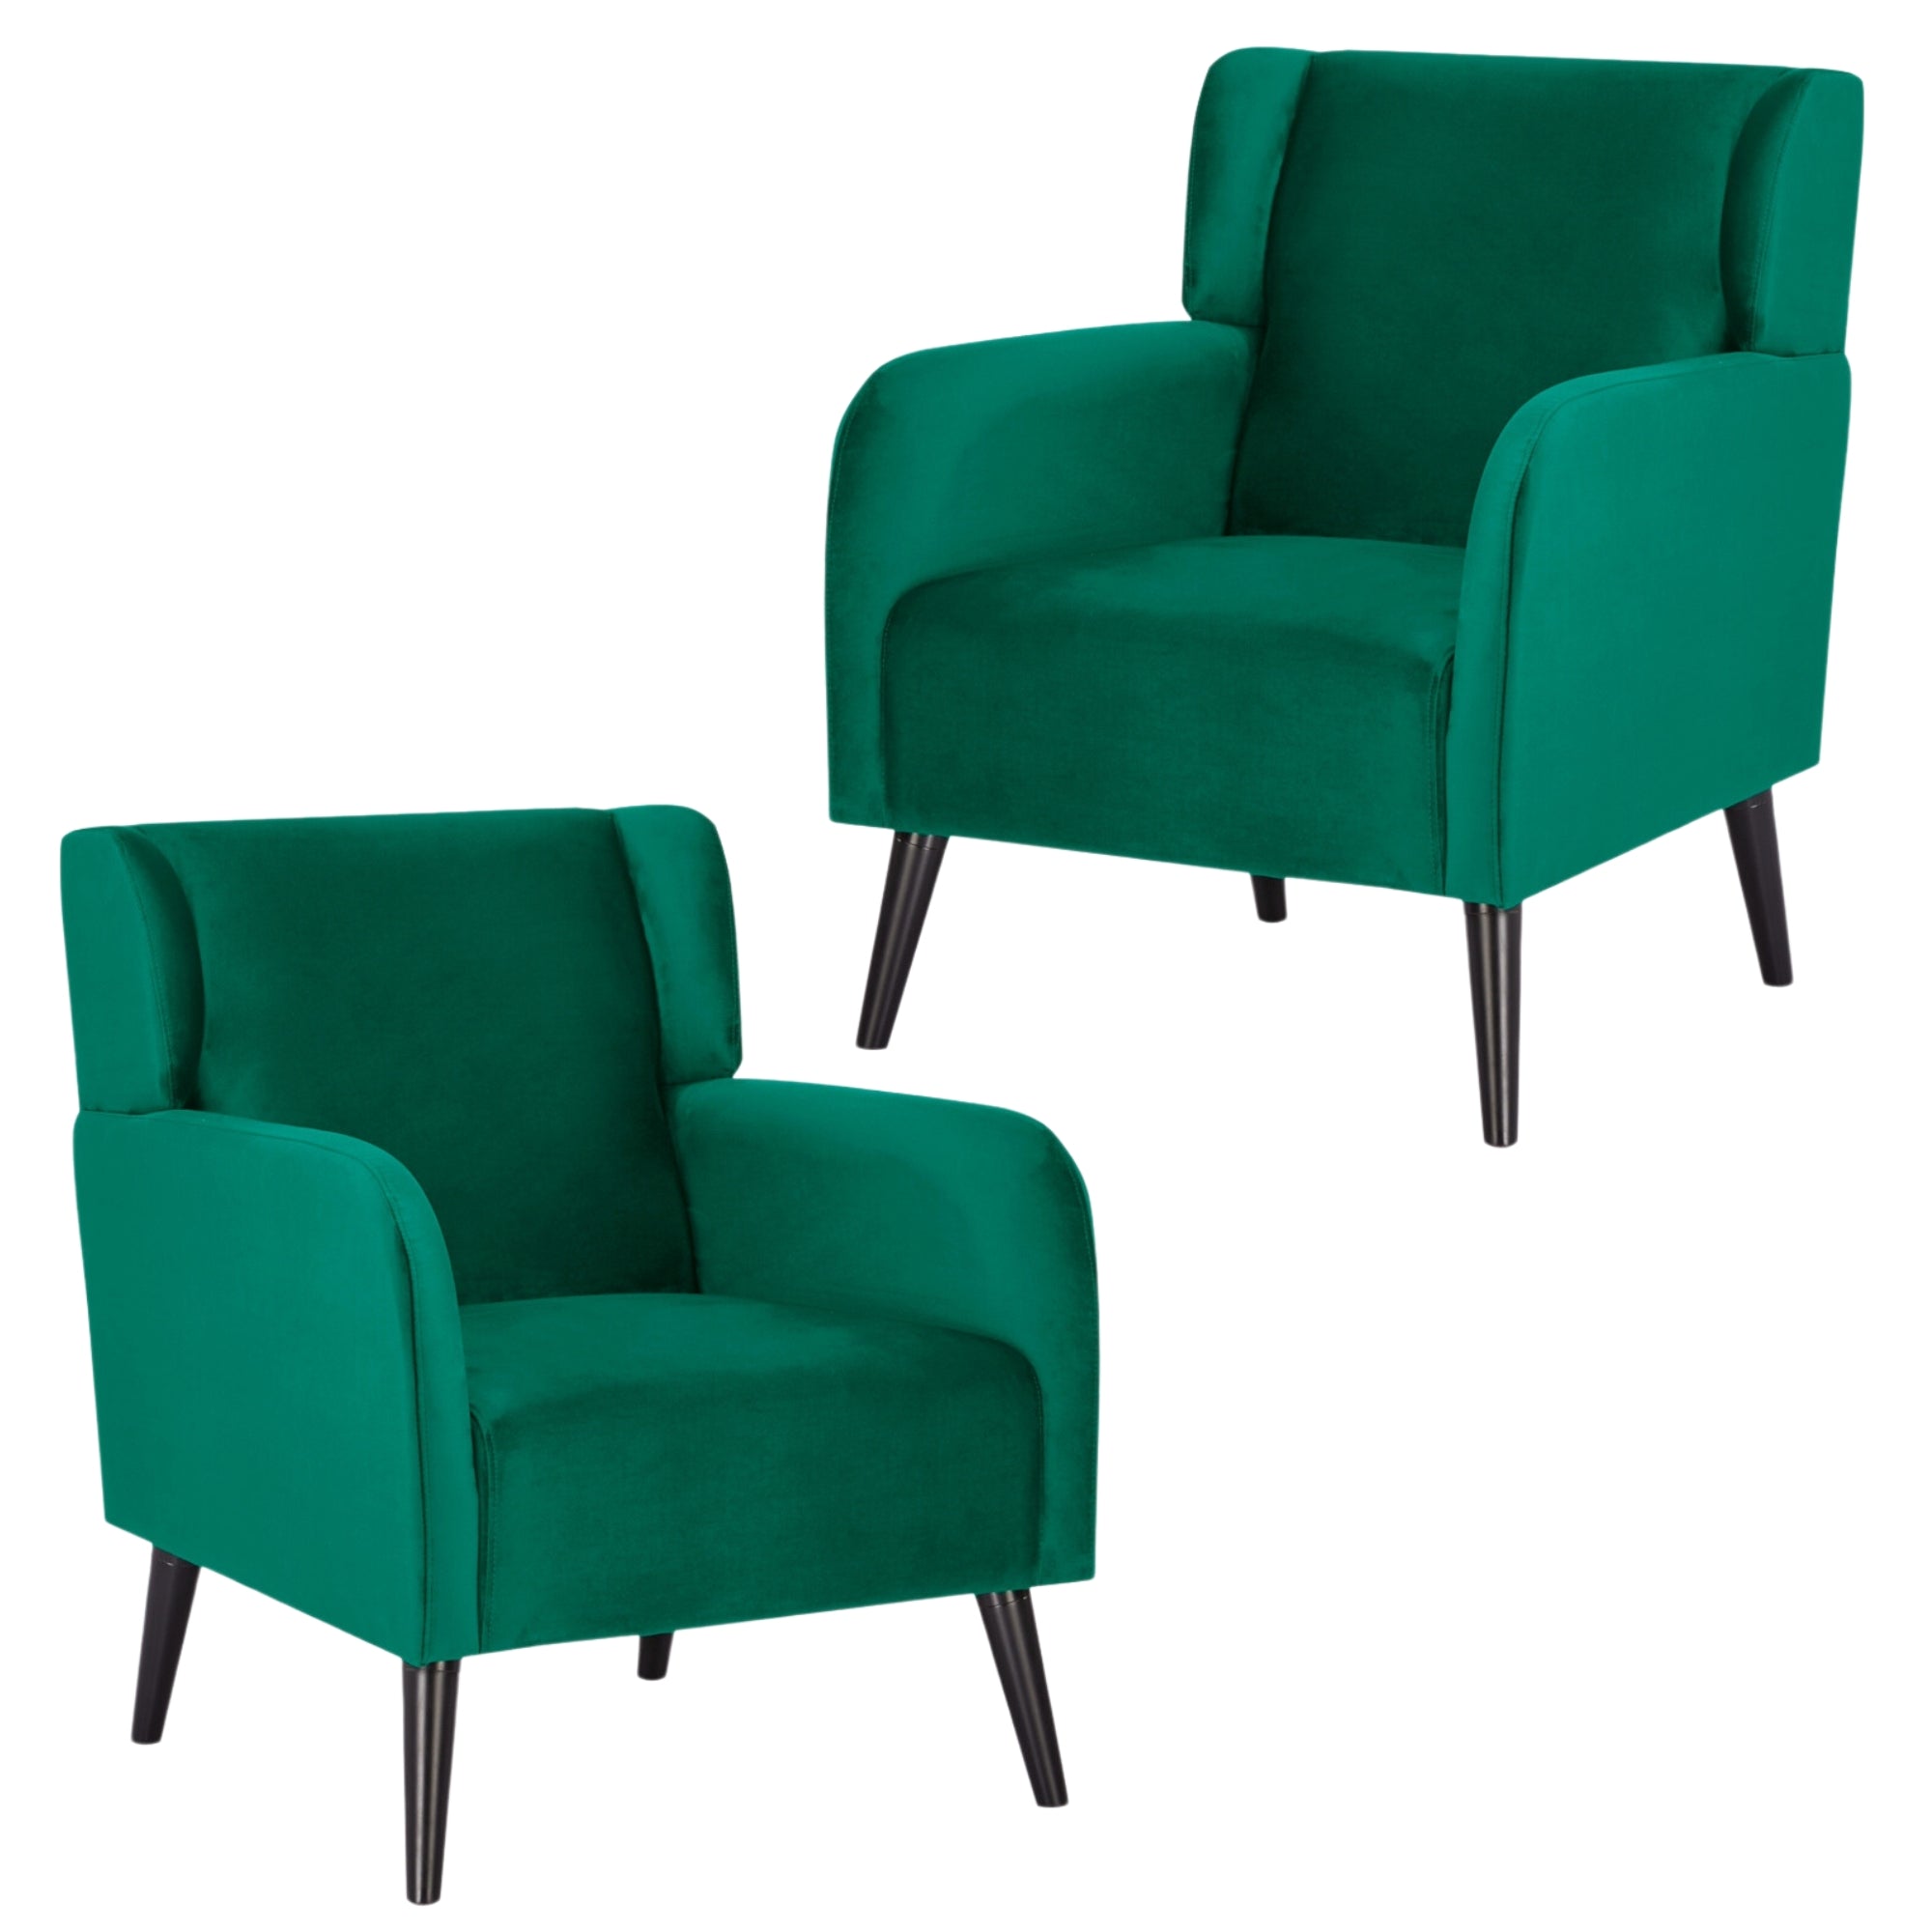 Plush Polyester Arm Chairs, Set of 2, Green, Wood Frame